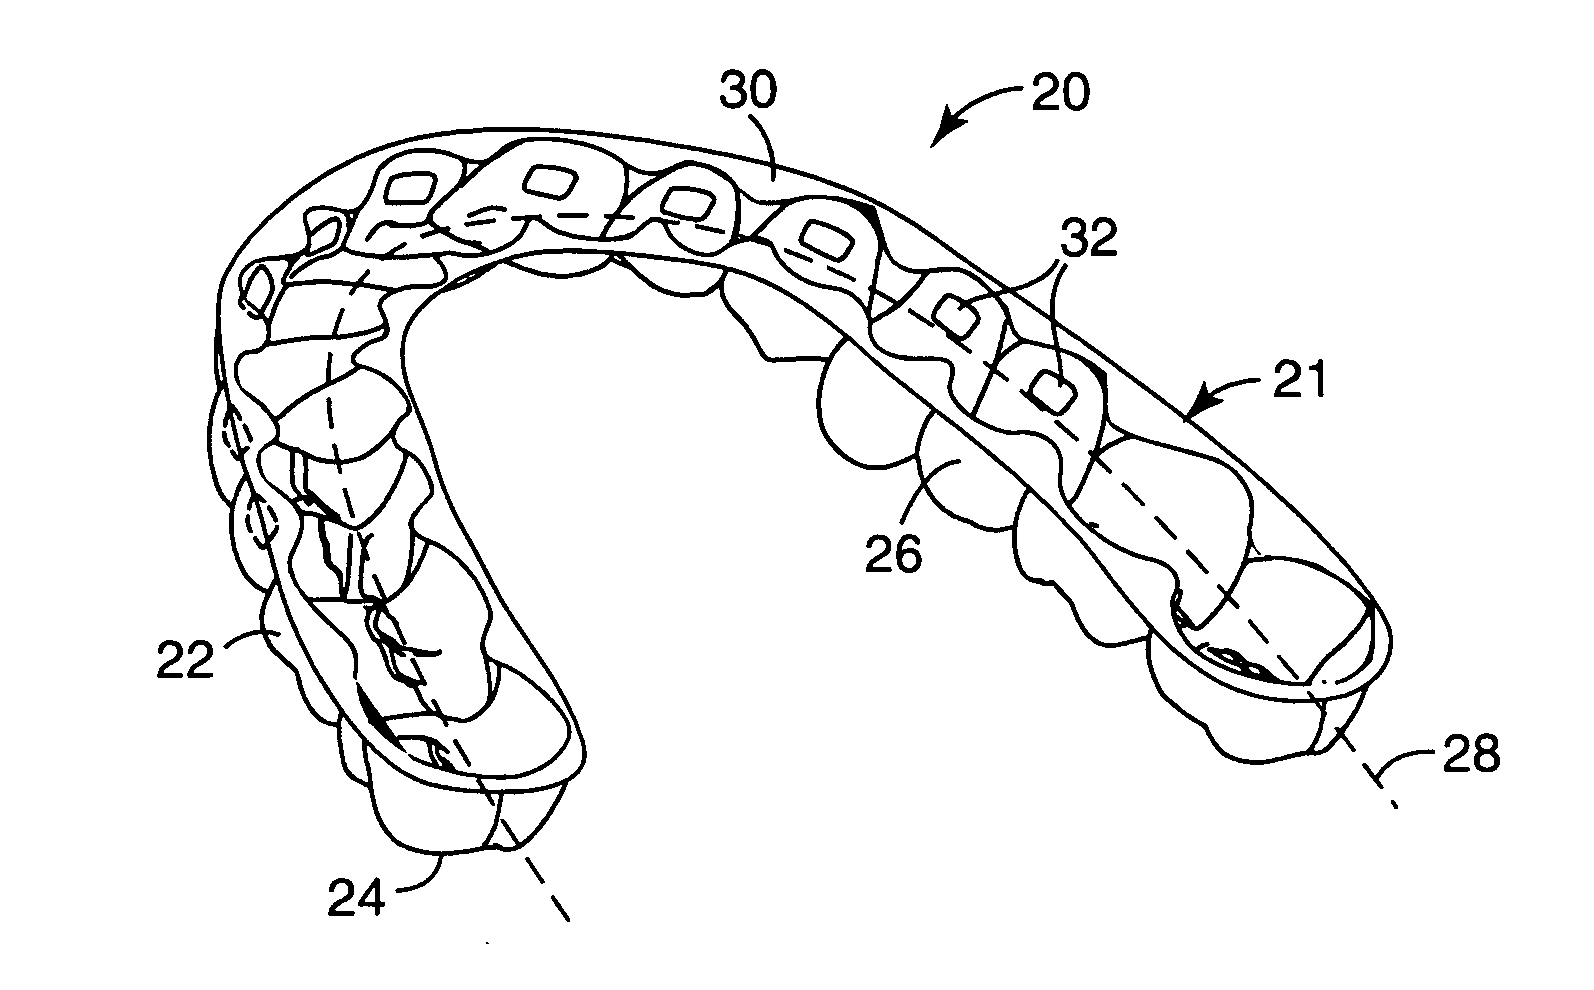 Orthodontic methods and apparatus for applying a composition to a patient's teeth